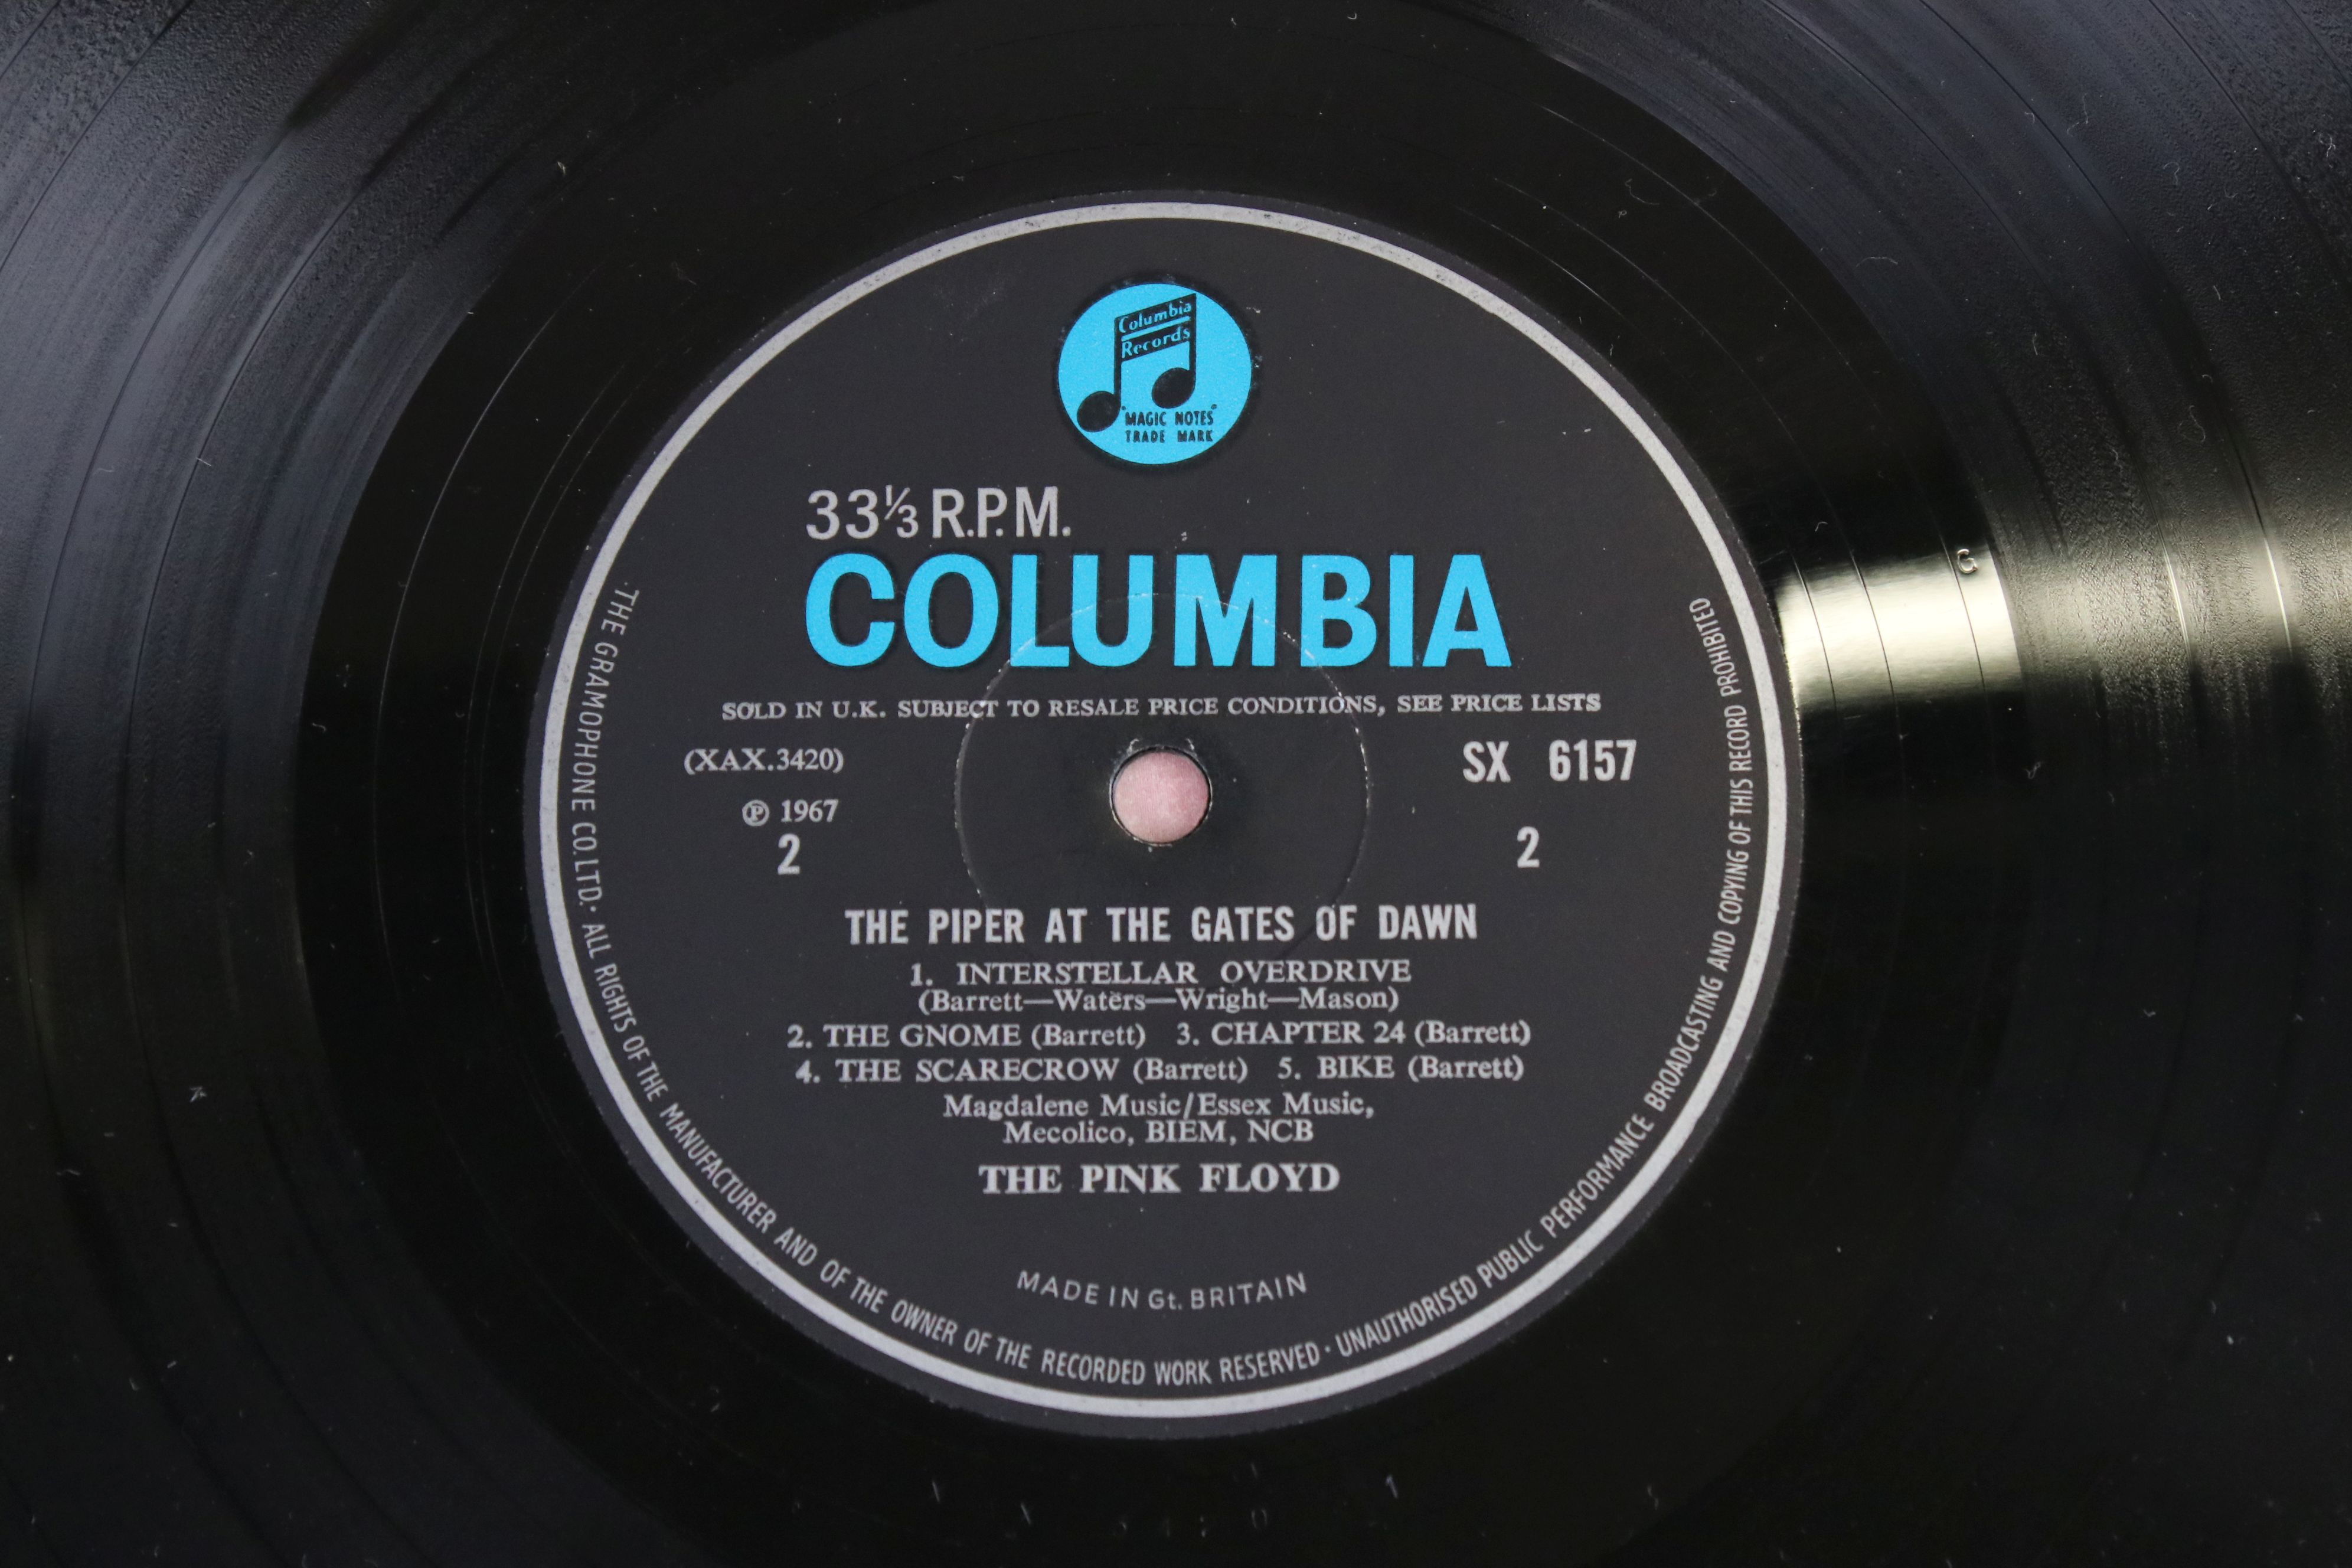 Vinyl - Pink Floyd The Piper at the Gates of Dawn LP on Columbia SX6157 mono, blue/black label - Image 4 of 5